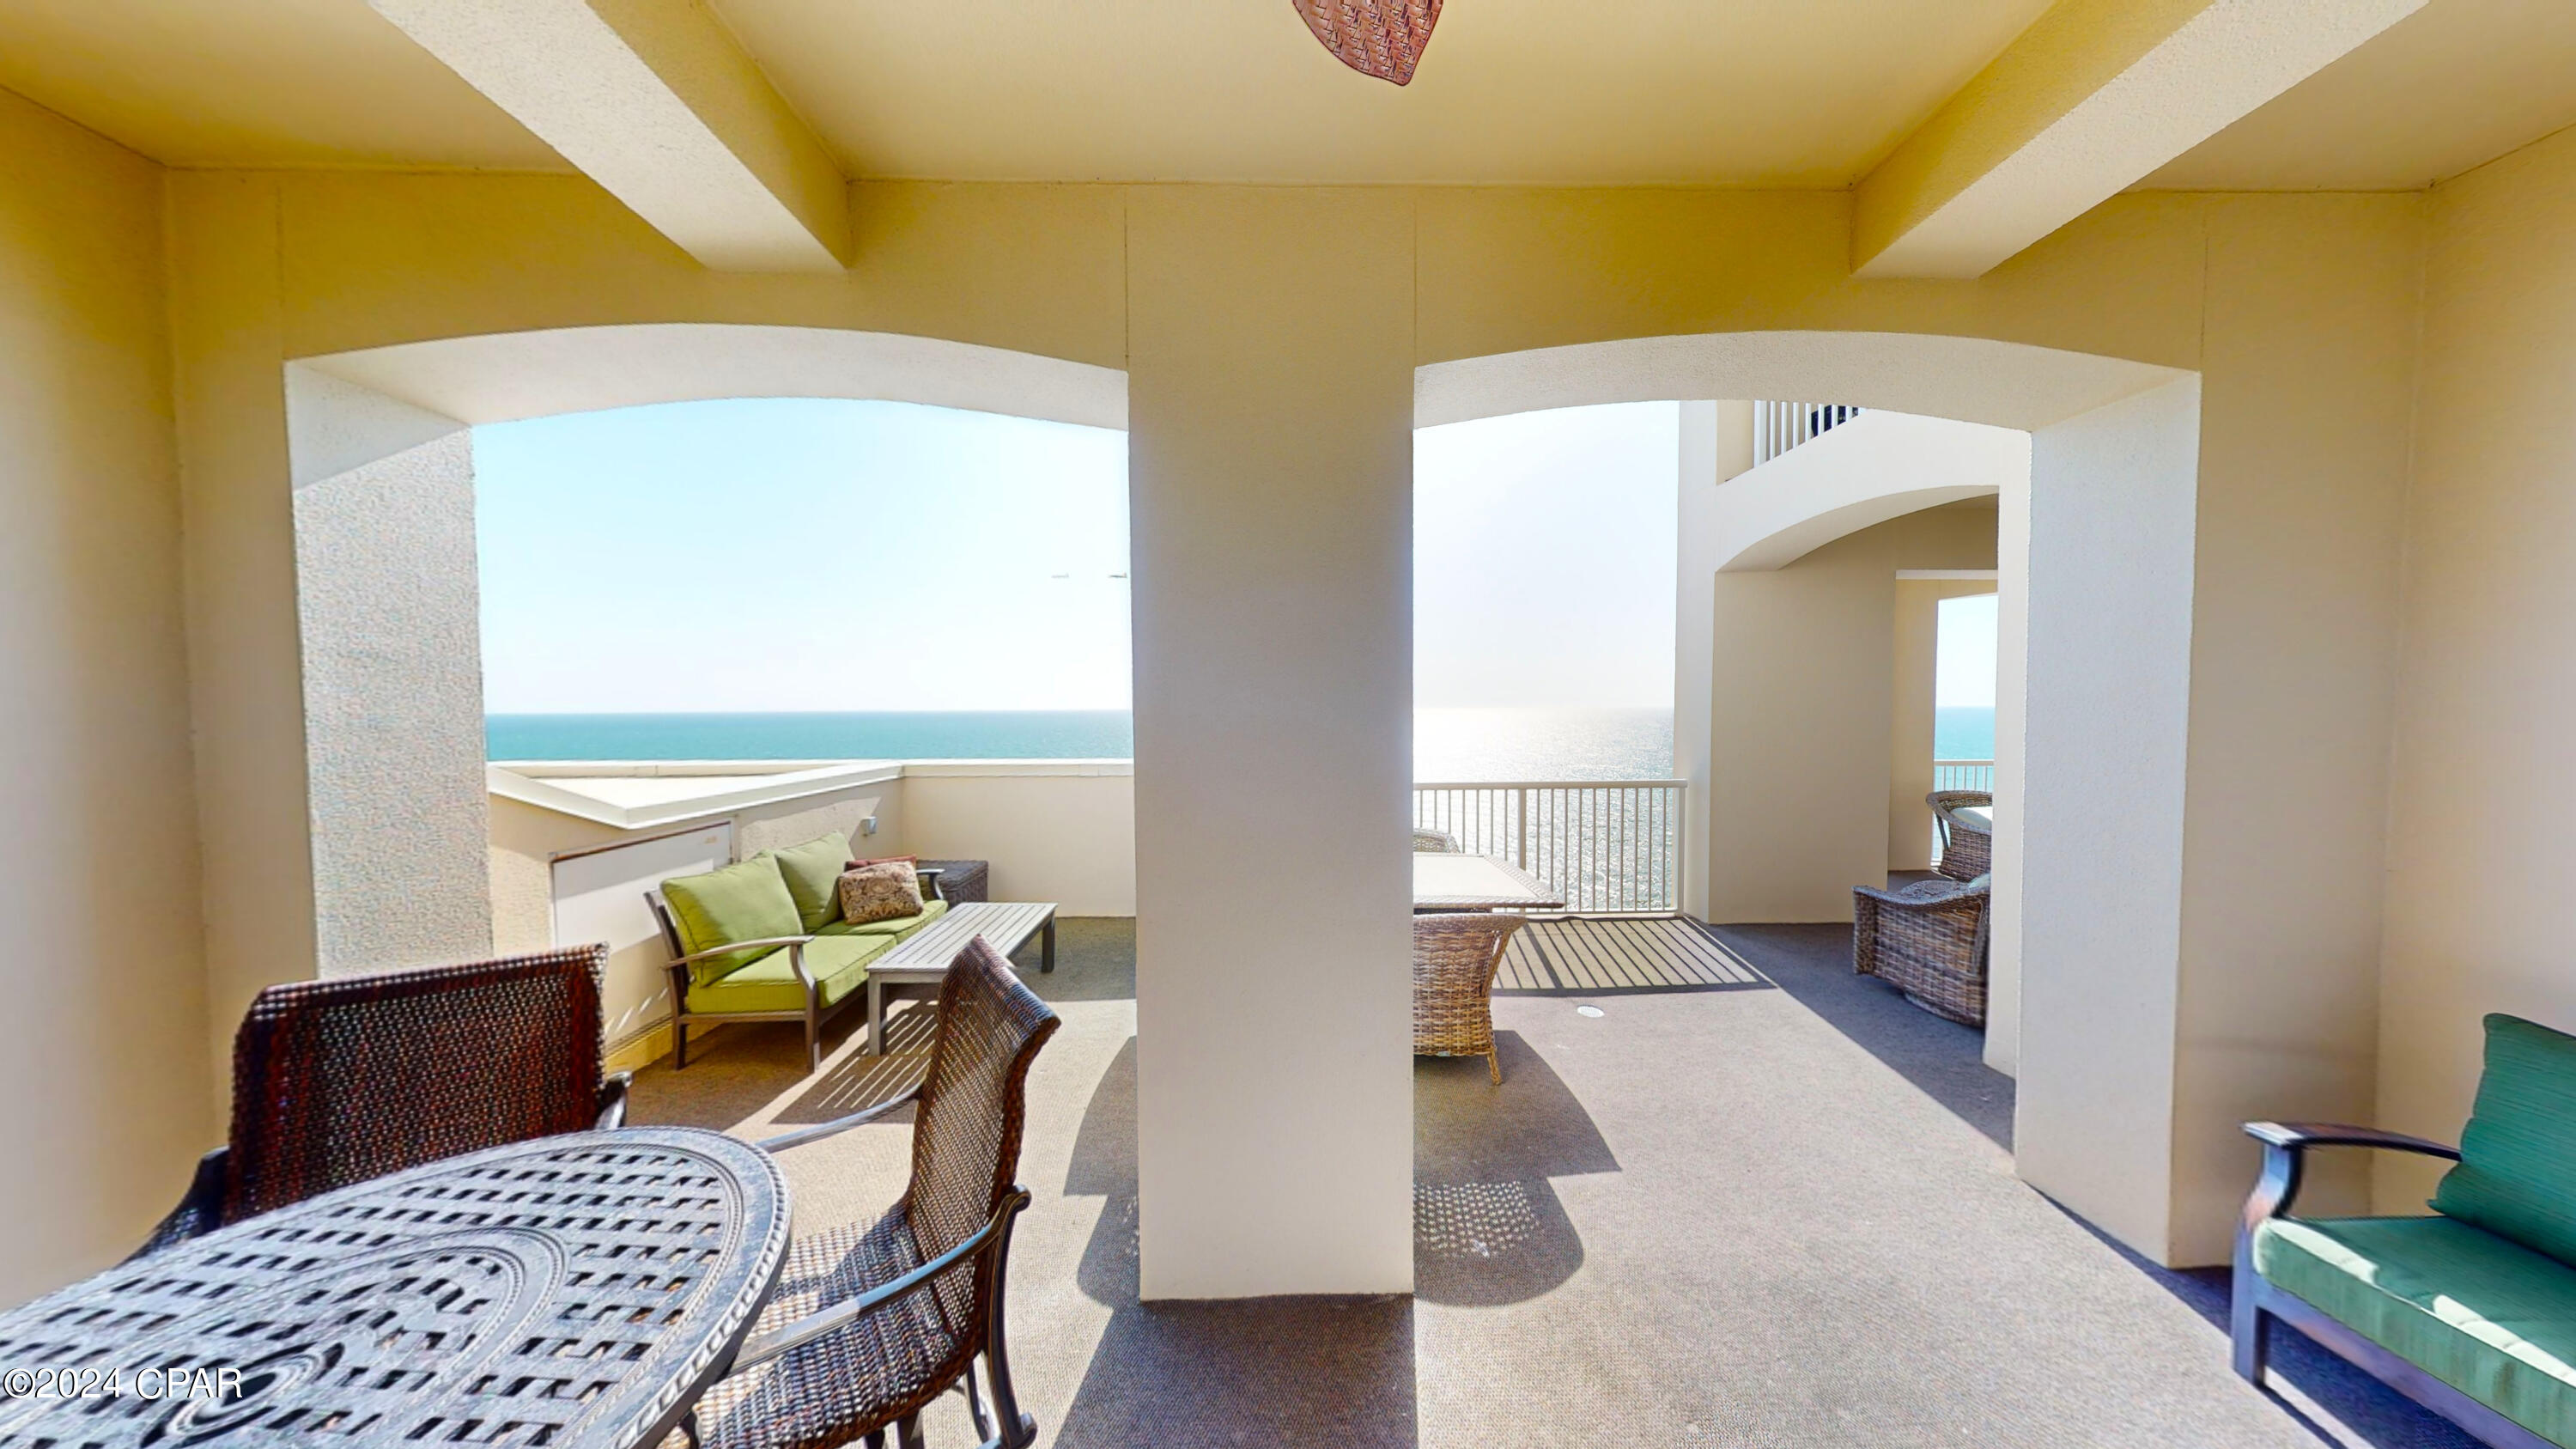 Rare Gulf-Front four-bedroom, three bath, fully furnished PENTHOUSE unit located at Grand Panama Beach Resort offering breath taking views of the Gulf of Mexico. This must-see property comes with an oversized balcony with ample room for two outdoor living areas and dining area offering breathtaking Gulf views, PLUS a private second balcony off one of the guest suites facing east to watch the sunrise over the emerald, green waters! Upon stepping inside, you are greeted by the beautiful tile floors leading into the main living area. The well-appointed kitchen with pantry features stainless appliances, a large breakfast, and a gorgeous backsplash perfect for entertaining guests. The kitchen is open to the living room, dining room and wet bar with wine fridge, that all have panoramic views and lead out to the private balcony perfect for both relaxation and entertaining with friends and family. The spacious master suite has access to the gulf front balcony, ensuite with dual vanities, a separate soaking tub, and a walk-in shower. There is a second master with ensuite, a single vanity, separate tub and walk-in shower located at the front of the unit, and two nice-sized bedrooms on the East side of the penthouse, one with a large East Facing private balcony for guests to enjoy. Even the parking is exclusive with two dedicated parking spaces in the private penthouse garage located under Tower 1! This non-rental unit has been meticulously maintained, and the dual HVAC units were updated in 2021. Grand Panama Beach Resort, one of the most desired resorts in Panama City Beach offers 24-hour security services, 2 resort style pools, with one being heated, beach side tiki bar, large fitness center, onsite general store, onsite bistro restaurant, owner's library, barbeque grills, and level 5 walk over from tower 2 to Tower 1. Don't Miss This Opportunity to Own a Piece of Paradise. Contact Us to Schedule a Viewing Today! Buyers should verify all important information.